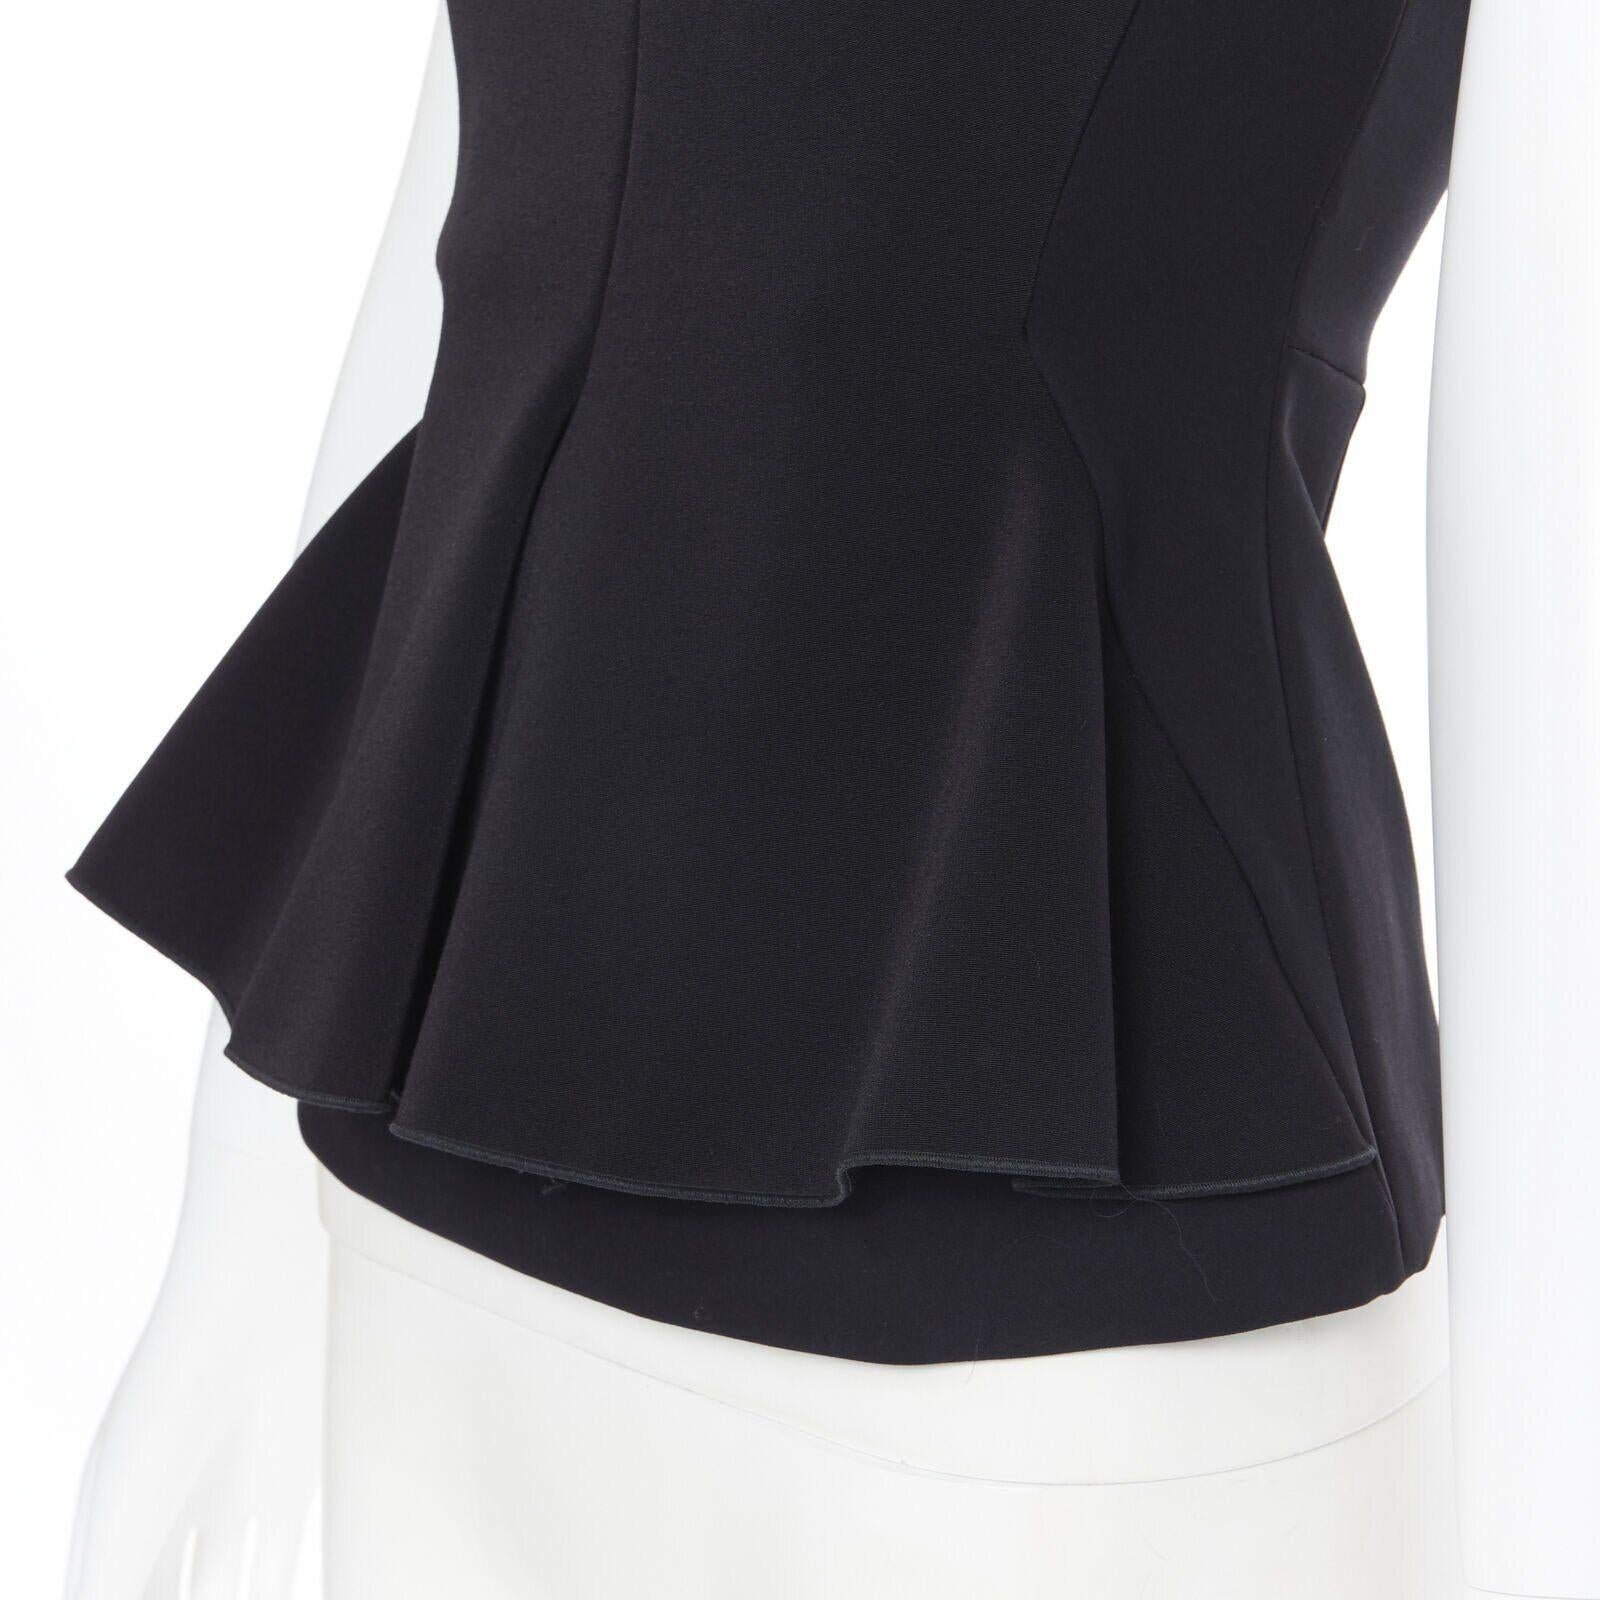 STELLA MCCARTNEY 2011 black sweetheart neckline seam peplum sleeveless top IT38
Reference: LNKO/A01579
Brand: Stella McCartney
Designer: Stella McCartney
Model: Peplum top
Collection: 2011
Material: Cotton, Blend
Color: Black
Pattern: Solid
Closure: